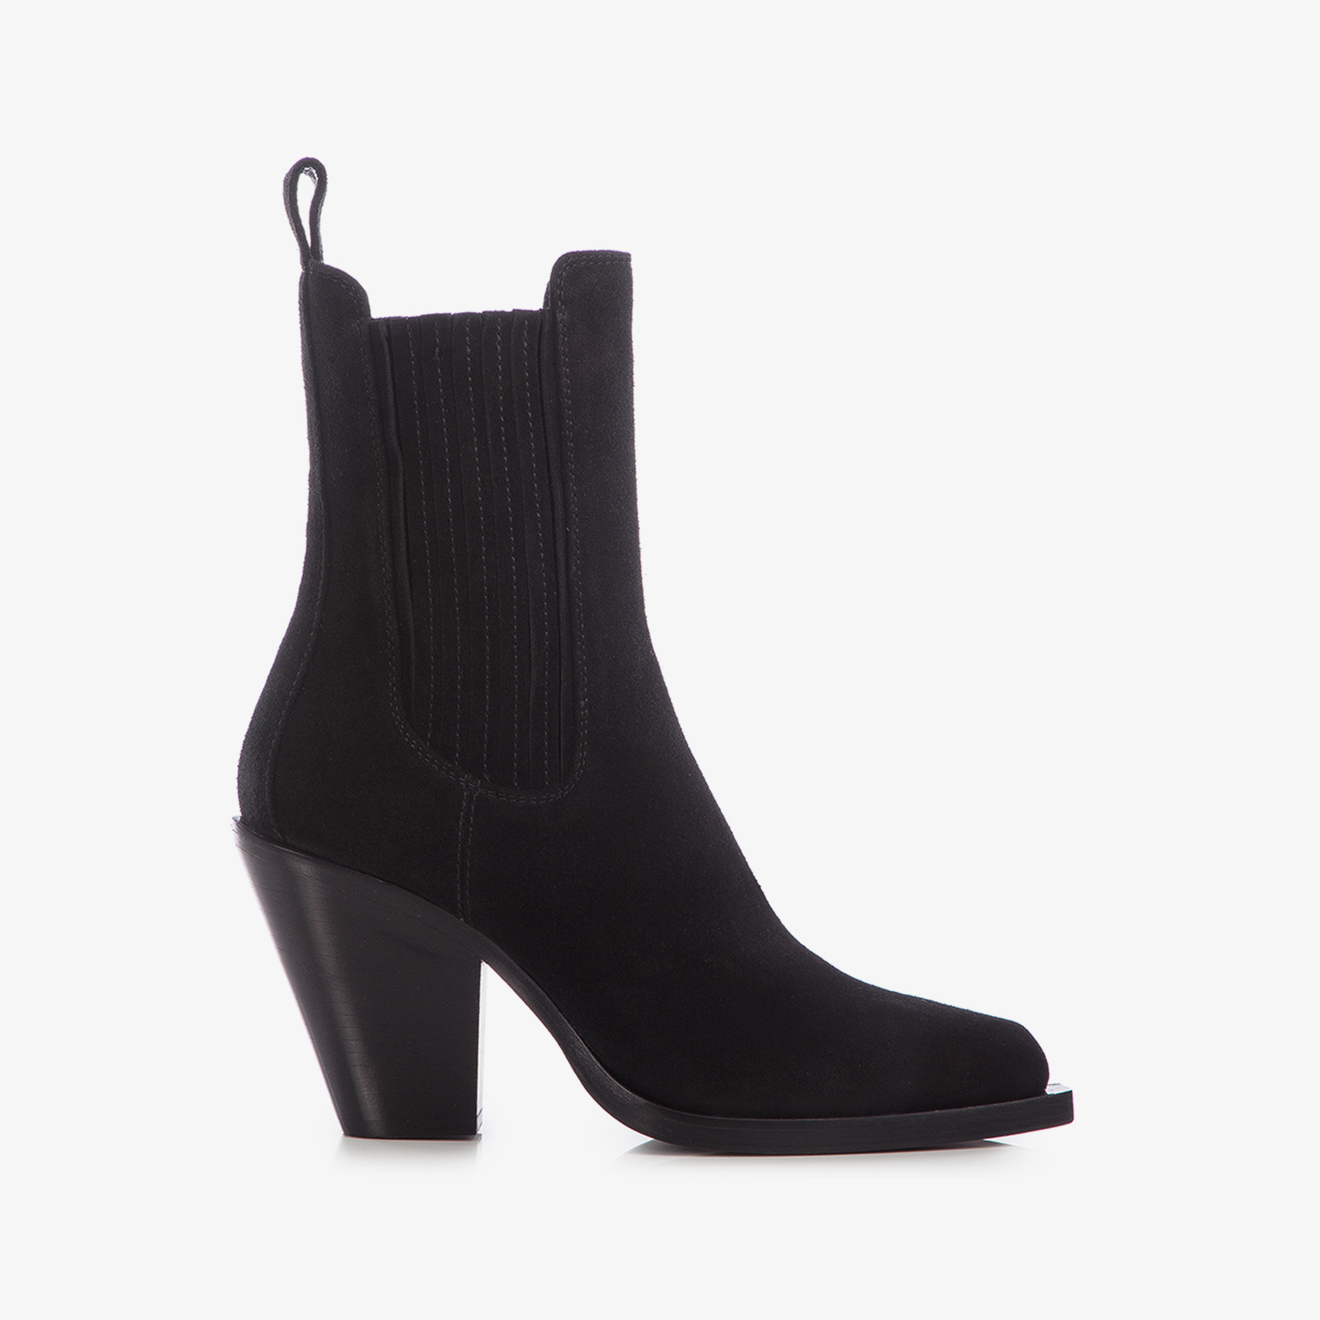 IVONNE ANKLE BOOT 90 mm - Le Silla official outlet